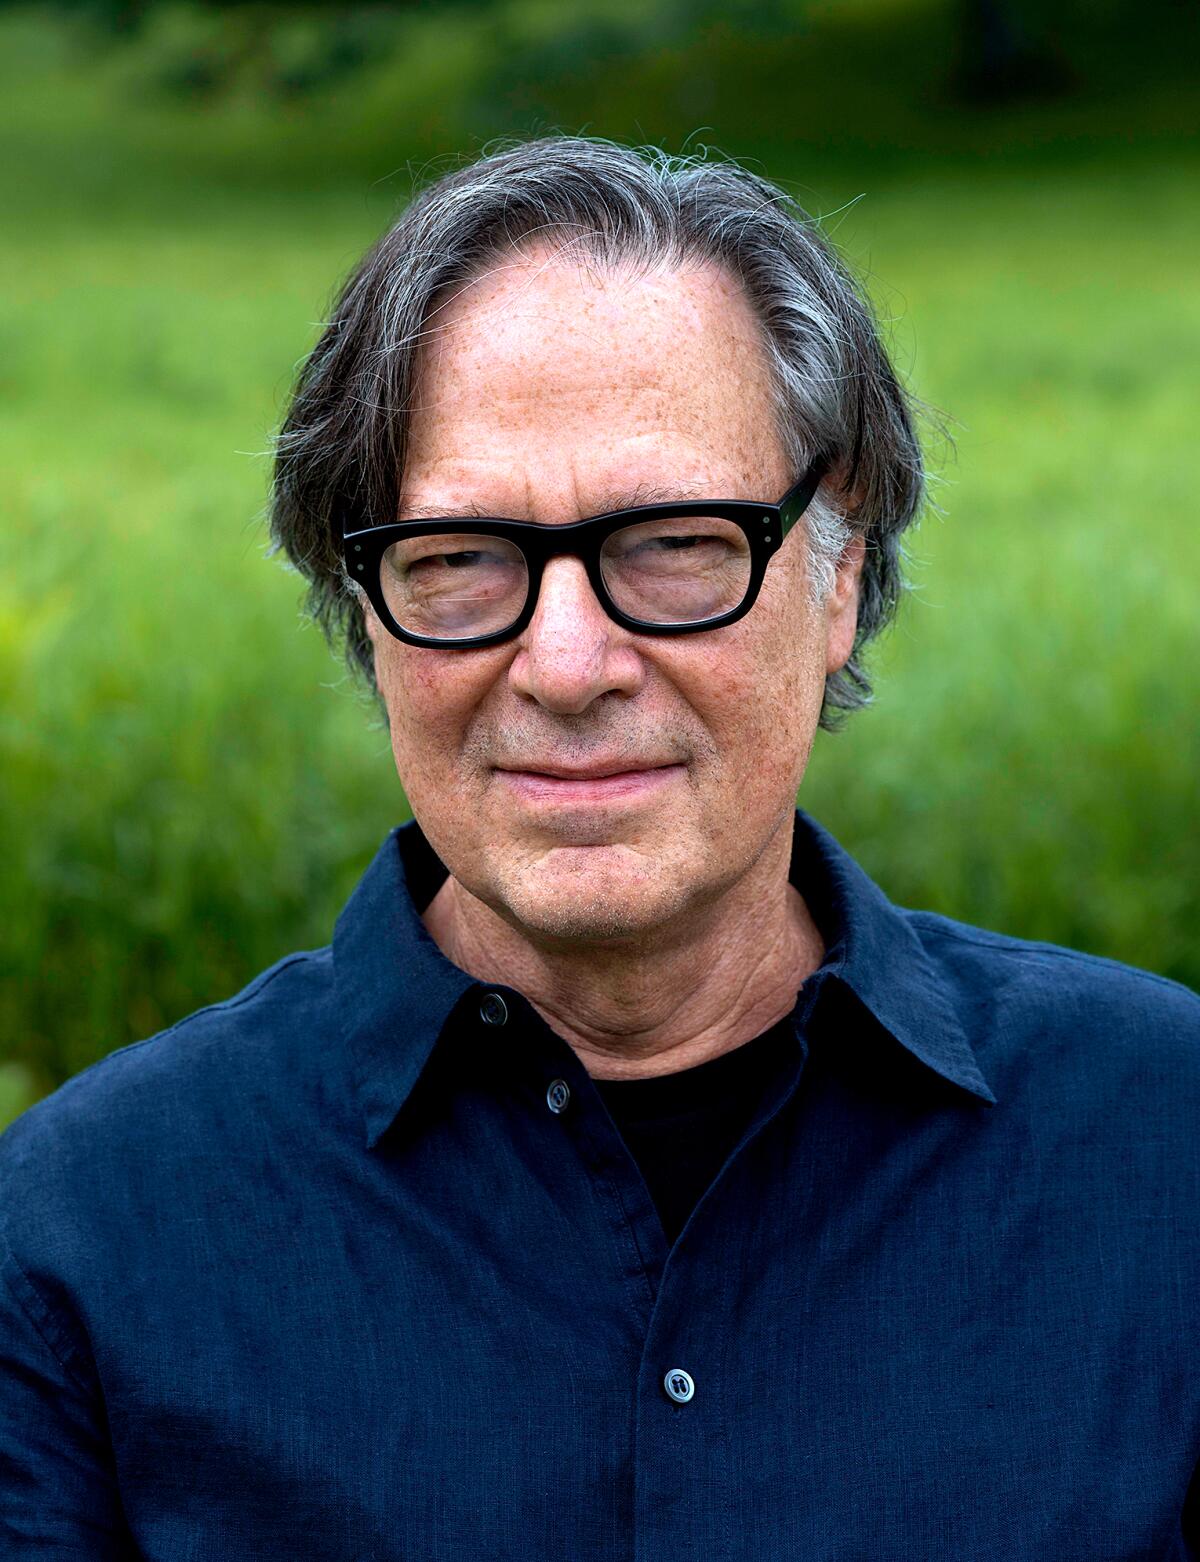 Author Philip Gefter wears black-rimmed glasses and a blue collared shirt.